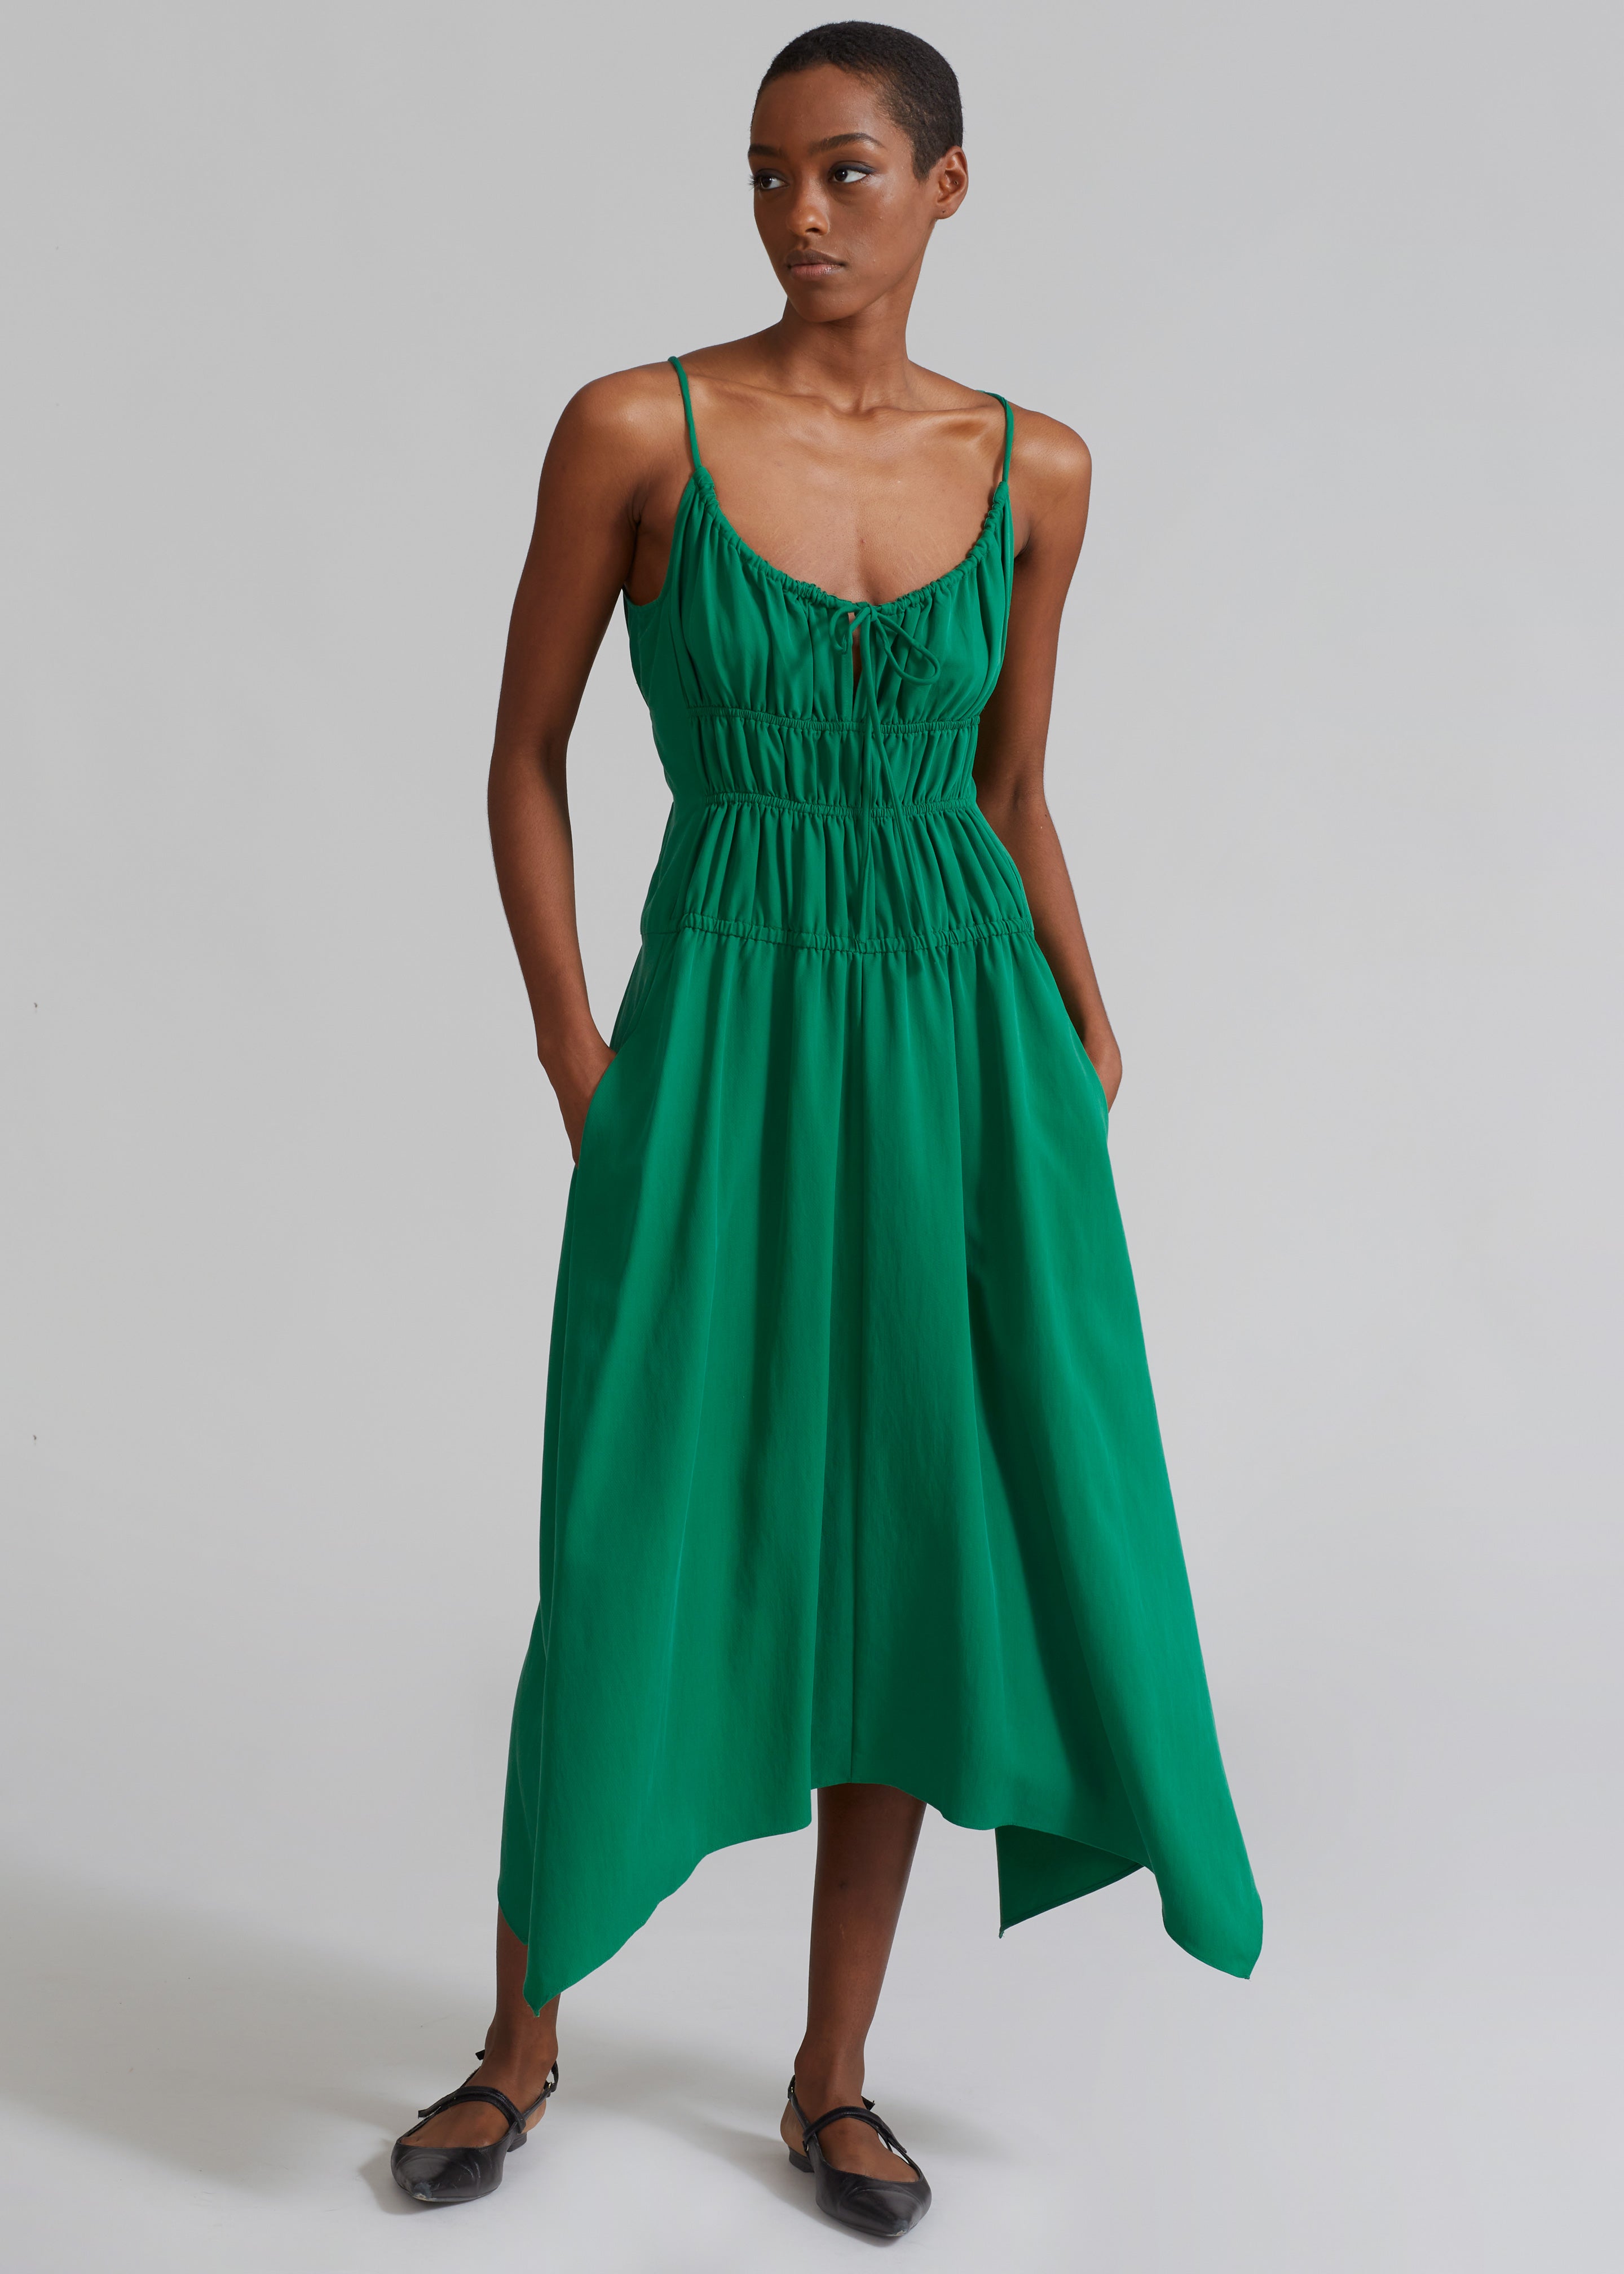 Proenza Schouler White Label Drapey Suiting Ruched Dress - Green - 5